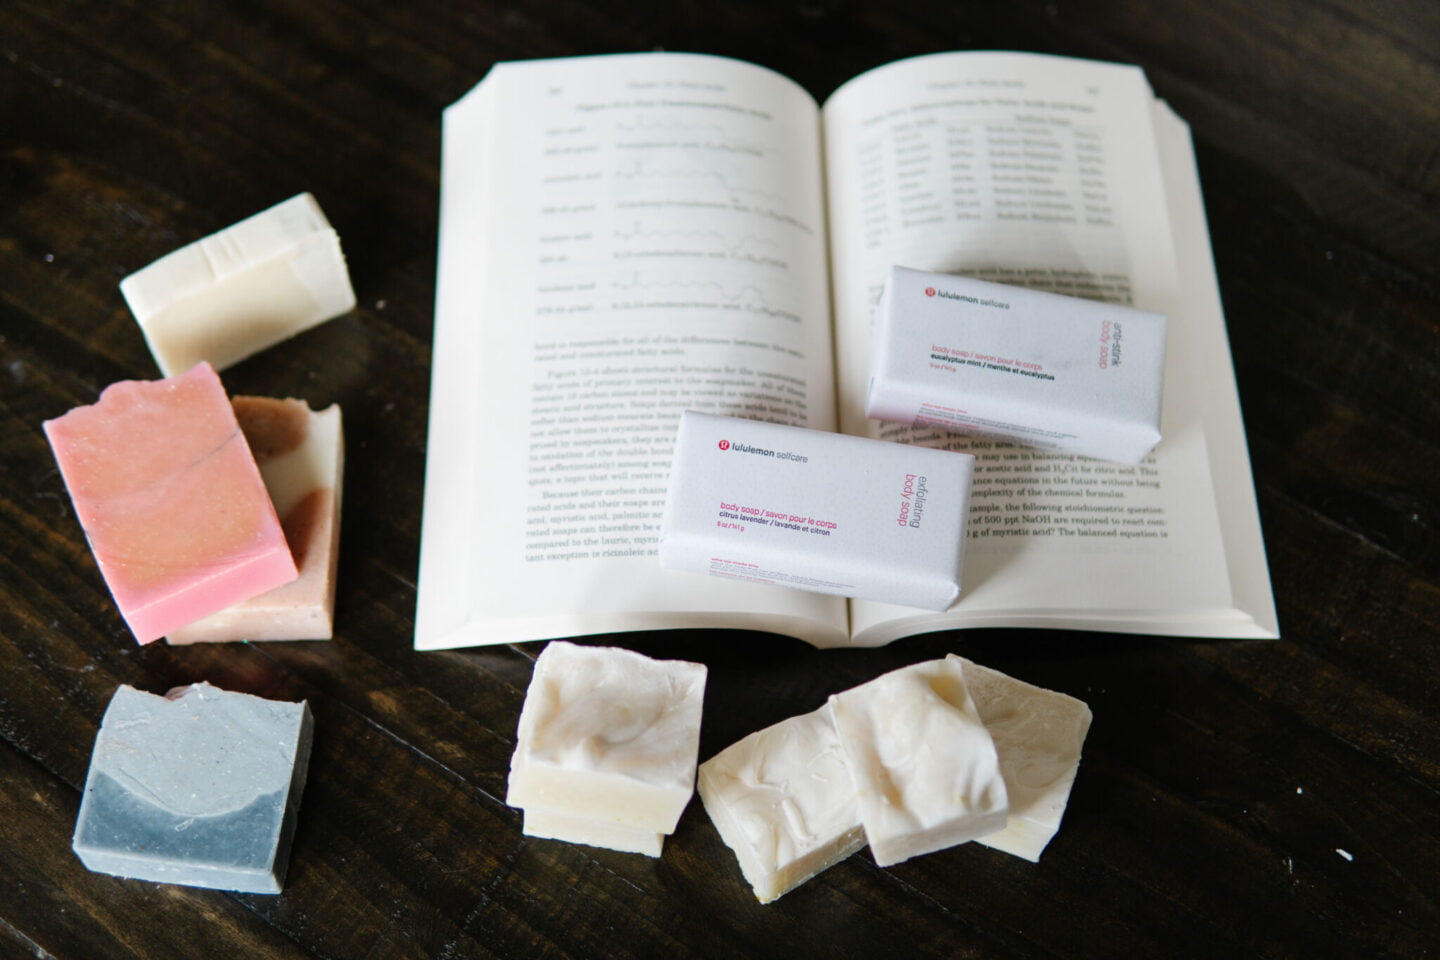 My cold process soap making snob review of lululemon’s new Exfoliating Body Soap